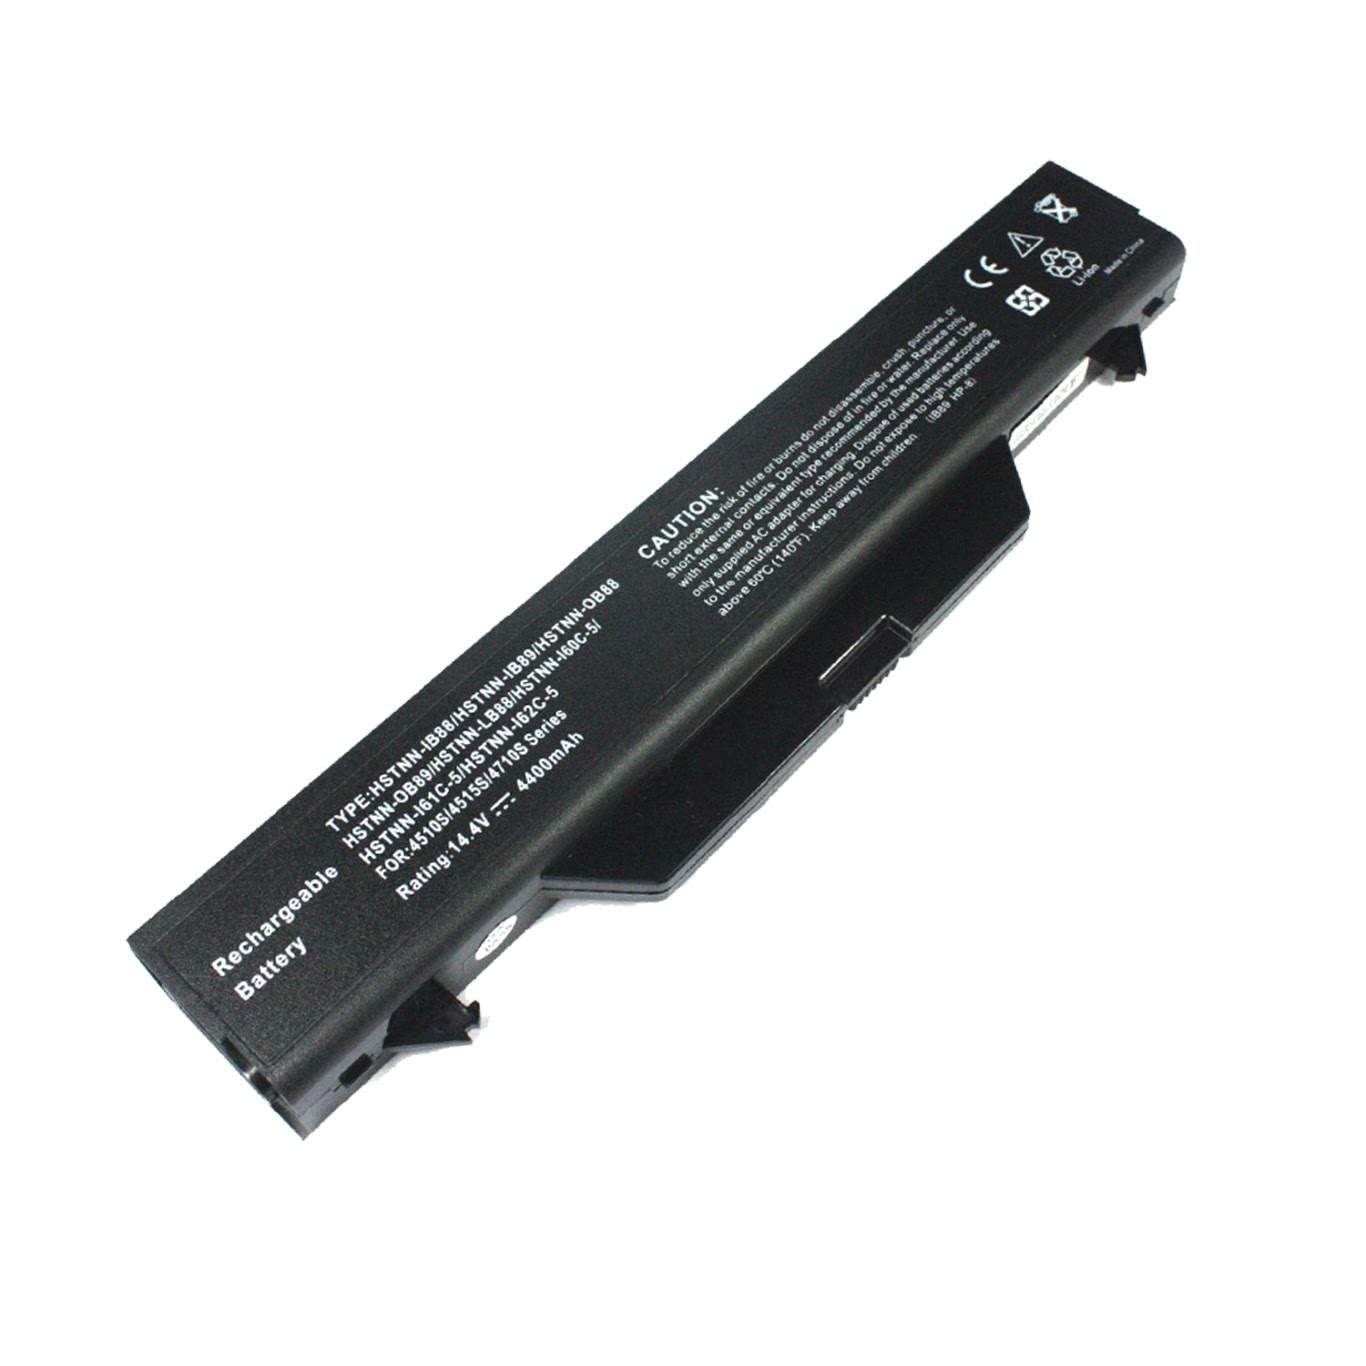 513129-121, 513129-141 replacement Laptop Battery for HP ProBook 4510s, ProBook 4510s/CT, 8 cells, 14.4V, 4400mAh